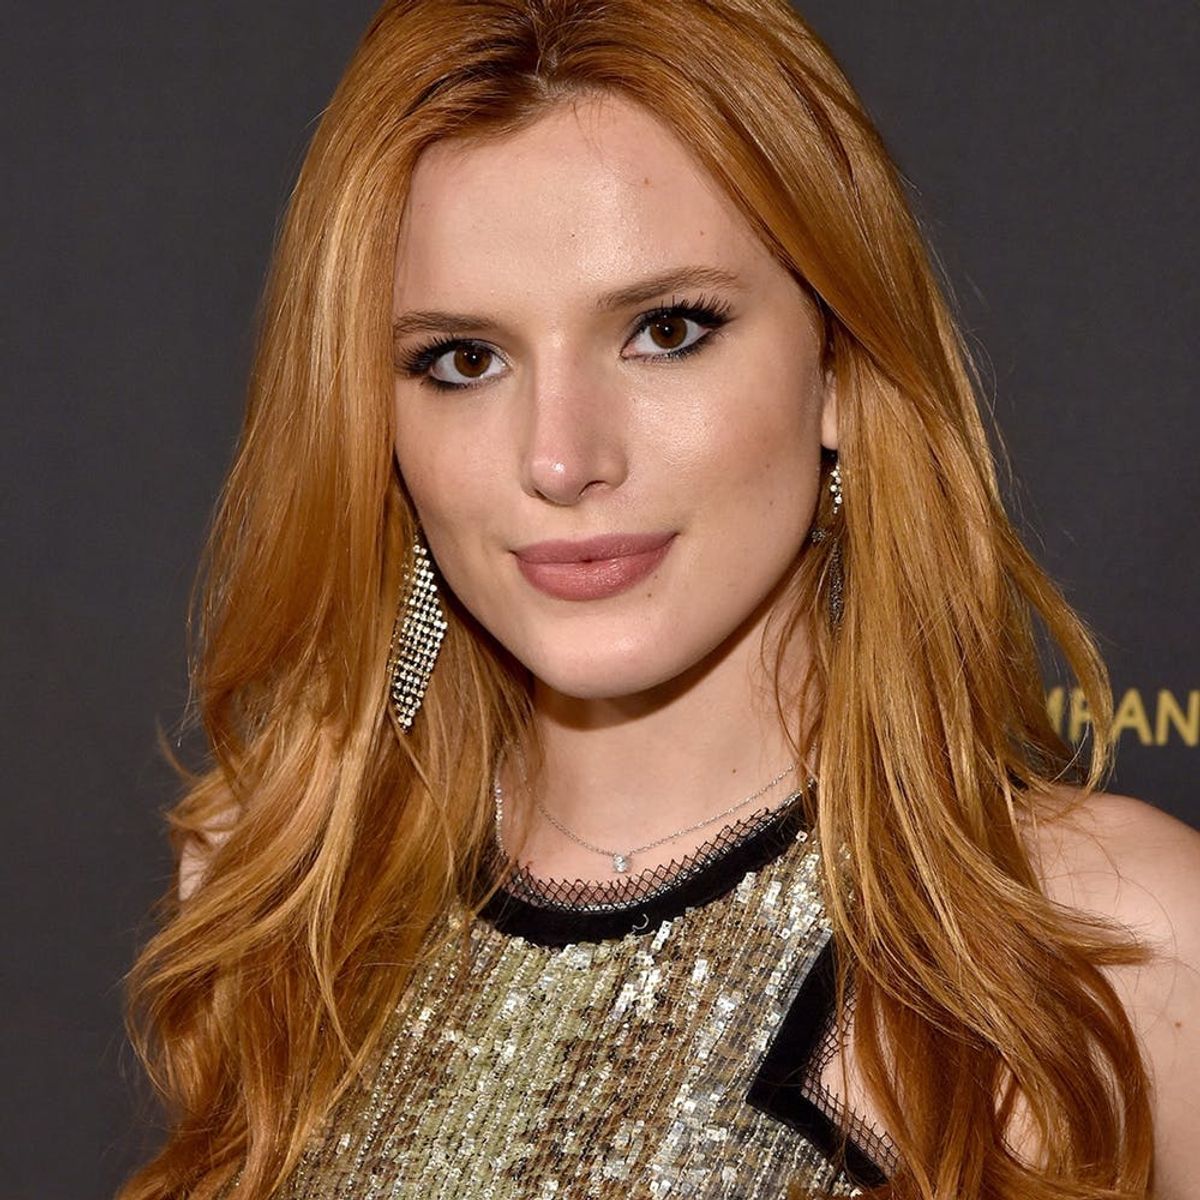 Bella Thorne Just Ditched Her Famous Red Locks for “Brownie” Hair